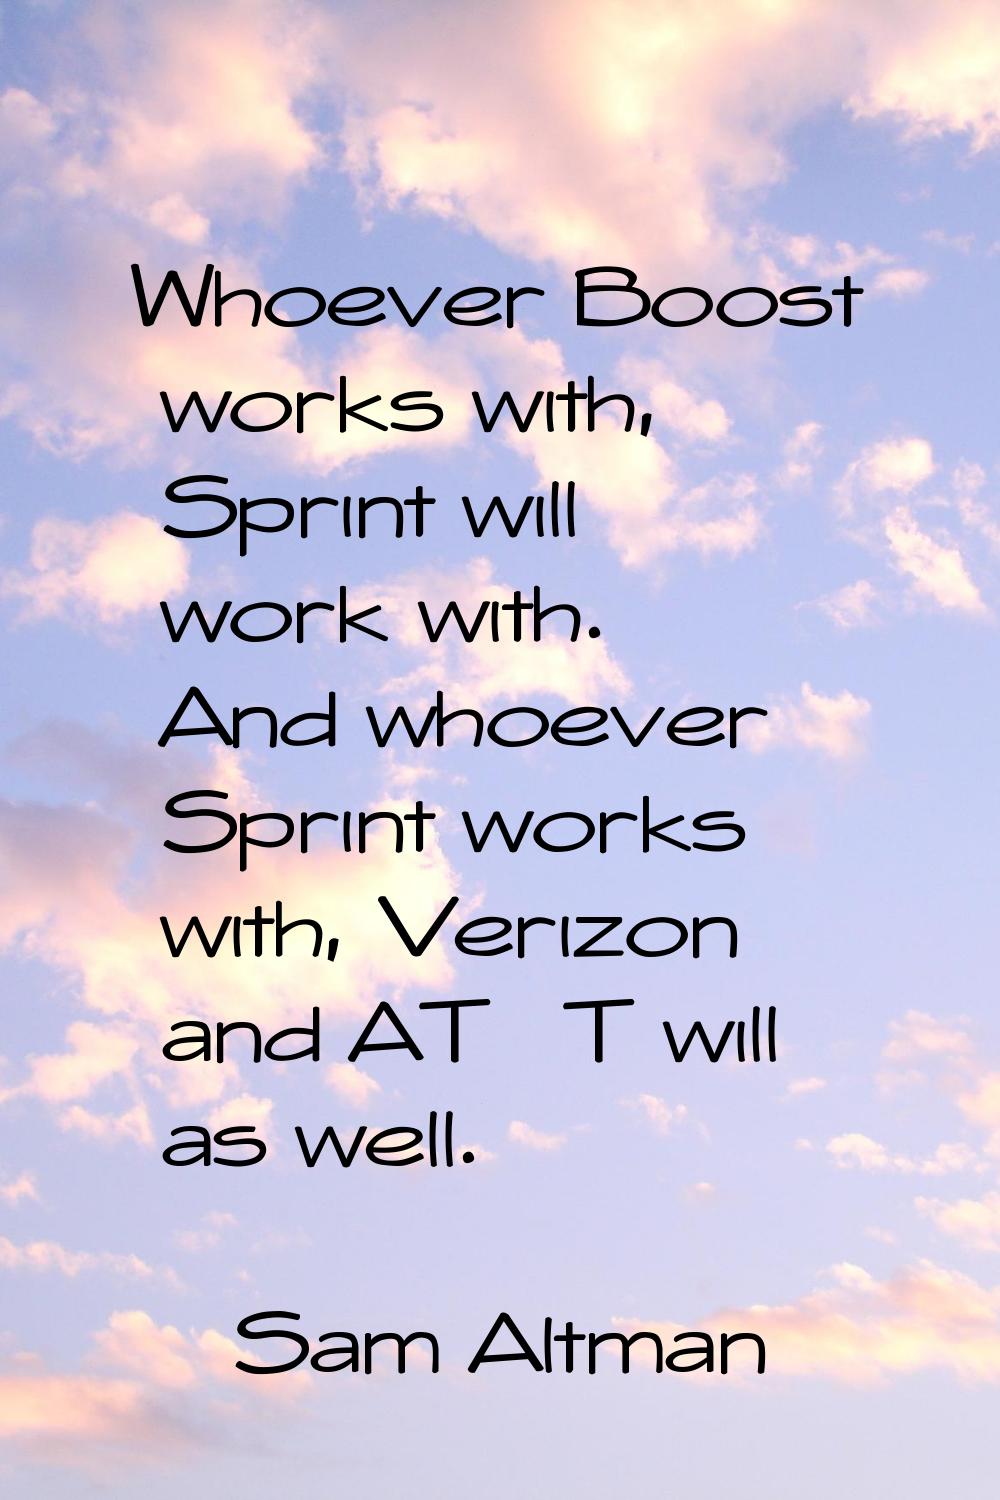 Whoever Boost works with, Sprint will work with. And whoever Sprint works with, Verizon and AT&T wi